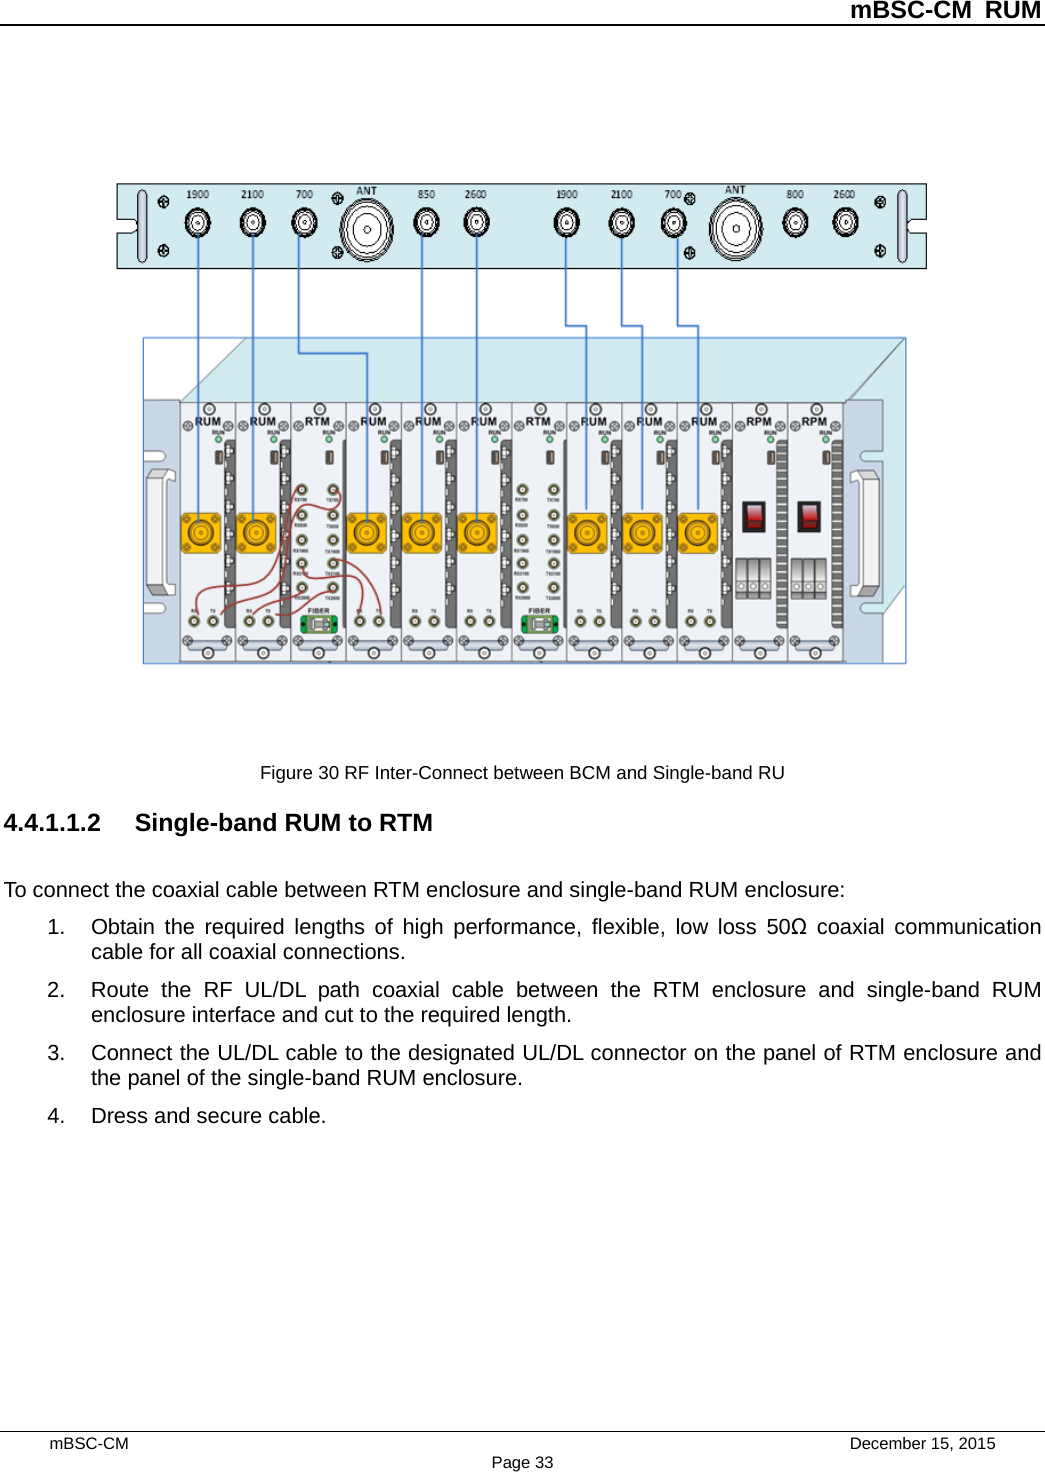          mBSC-CM RUM   mBSC-CM                                 December 15, 2015 Page 33   Figure 30 RF Inter-Connect between BCM and Single-band RU 4.4.1.1.2 Single-band RUM to RTM To connect the coaxial cable between RTM enclosure and single-band RUM enclosure: 1. Obtain the required lengths of high performance, flexible, low loss 50Ω coaxial communication cable for all coaxial connections. 2. Route the RF UL/DL path coaxial cable between the RTM enclosure and single-band  RUM enclosure interface and cut to the required length. 3. Connect the UL/DL cable to the designated UL/DL connector on the panel of RTM enclosure and the panel of the single-band RUM enclosure. 4. Dress and secure cable. 